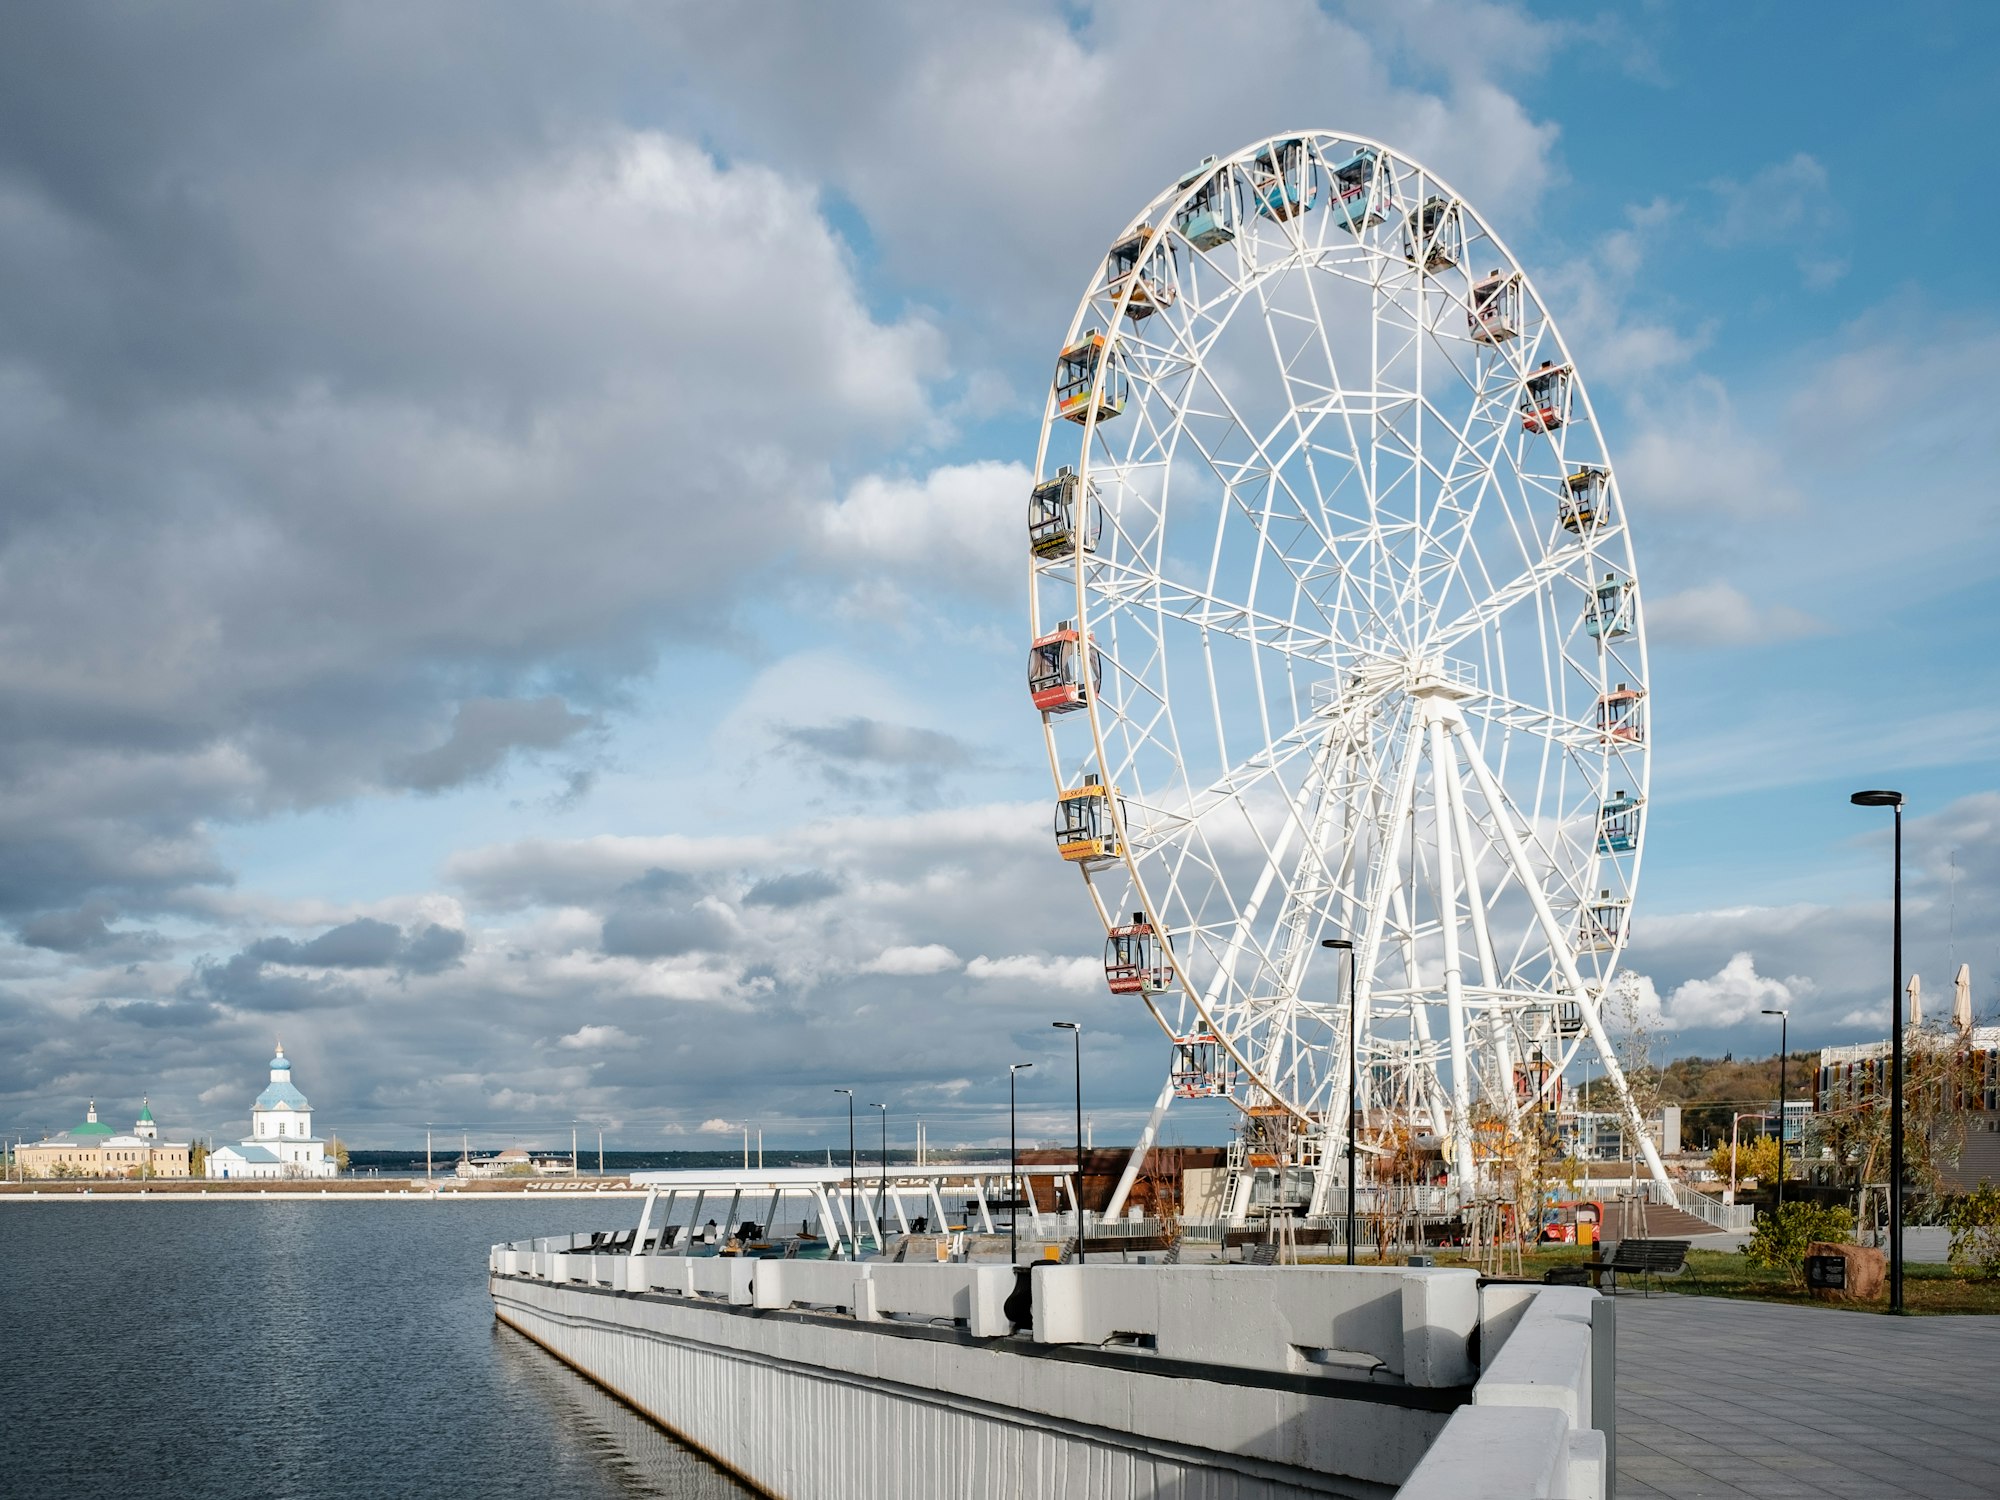 a large ferris wheel sitting next to a body of water